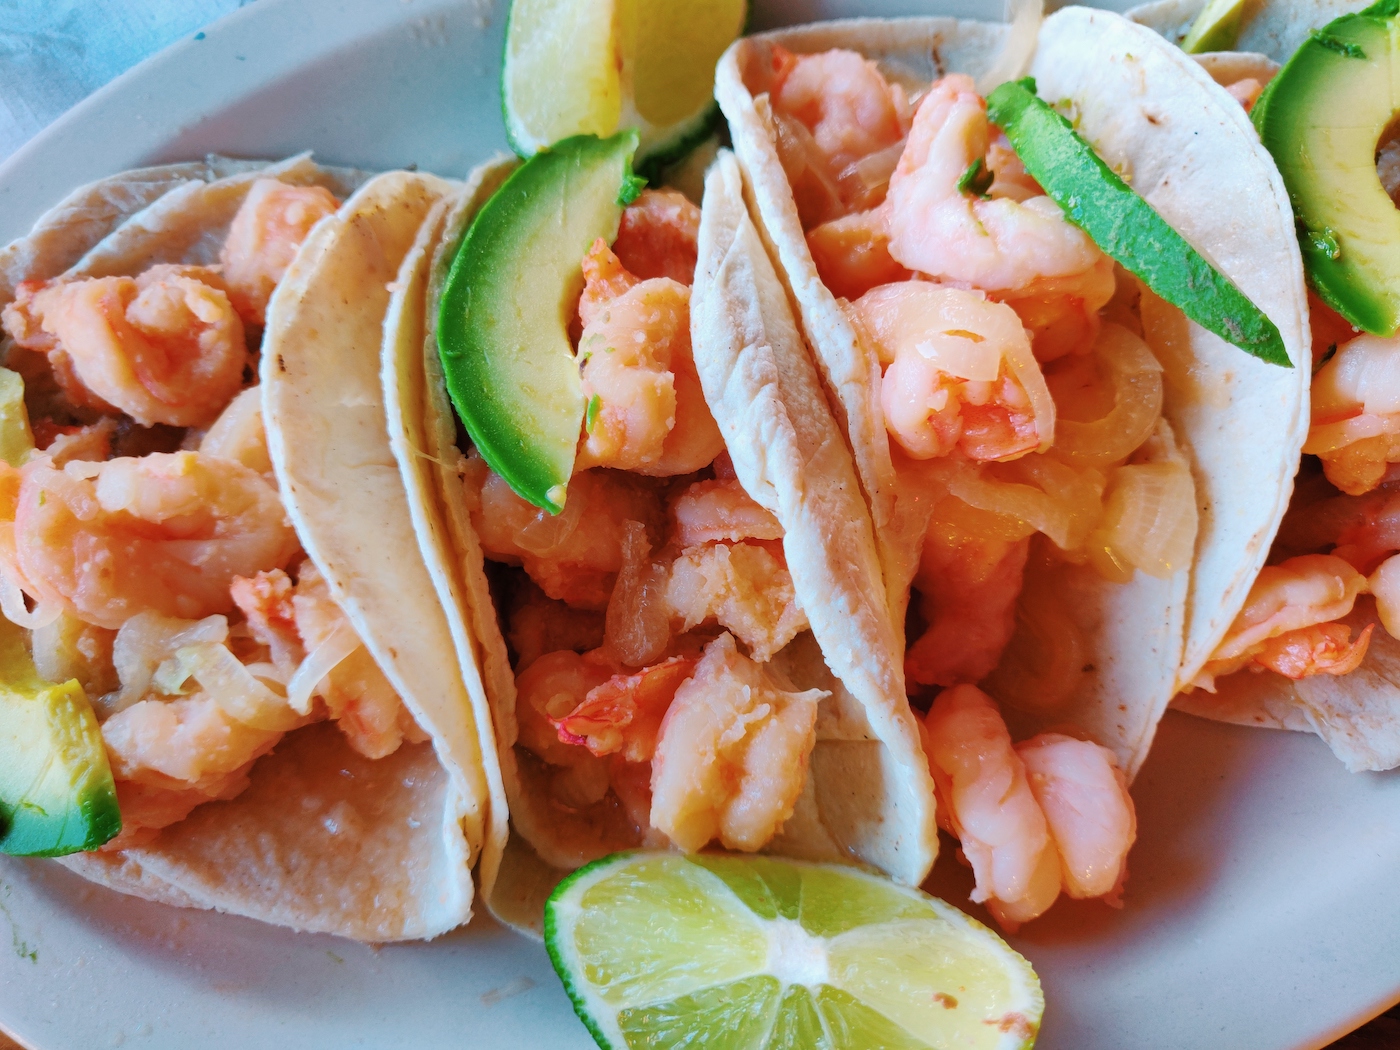 Shrimp tacos cooked in a butter and garlic sauce, topped with grilled onions and avocado and served with lime wedges